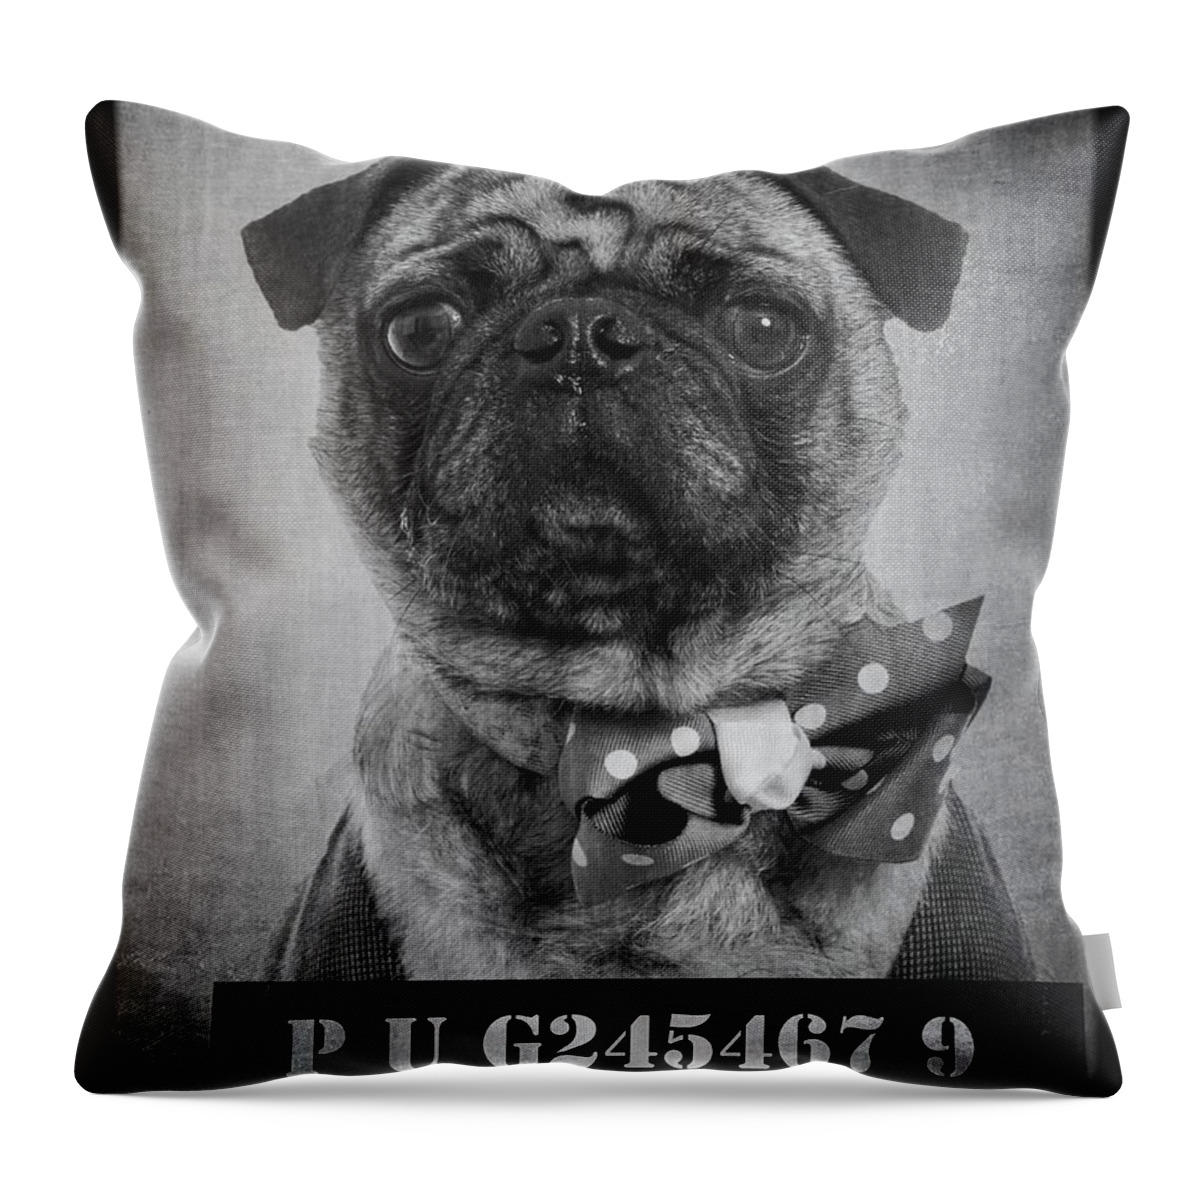 Bad Throw Pillow featuring the photograph Bad Dog by Edward Fielding